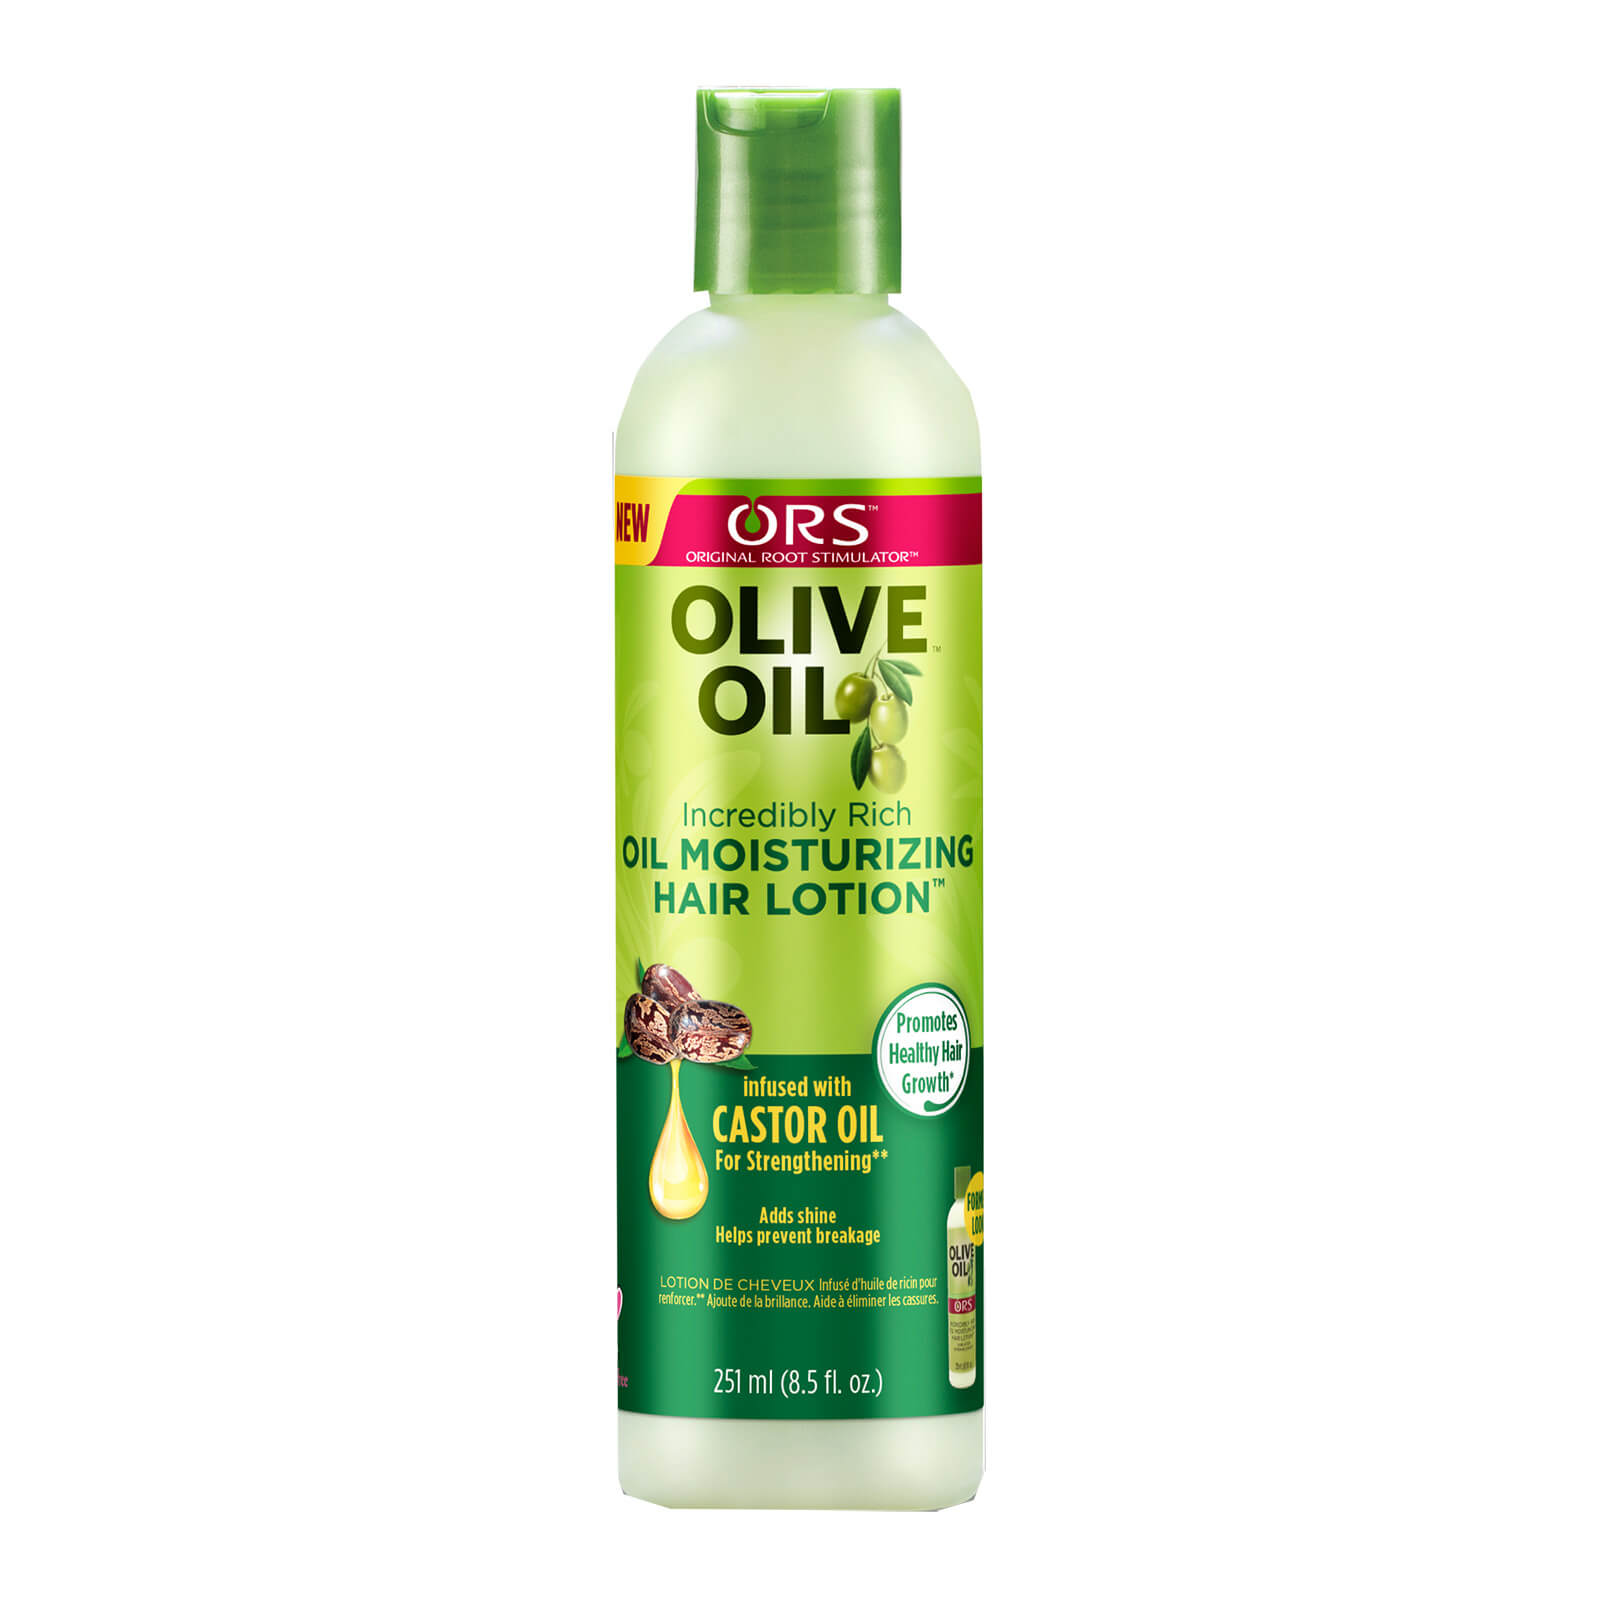 ORS Olive Oil Incredibly Rich Oil Moisturising Hair Lotion 251ml